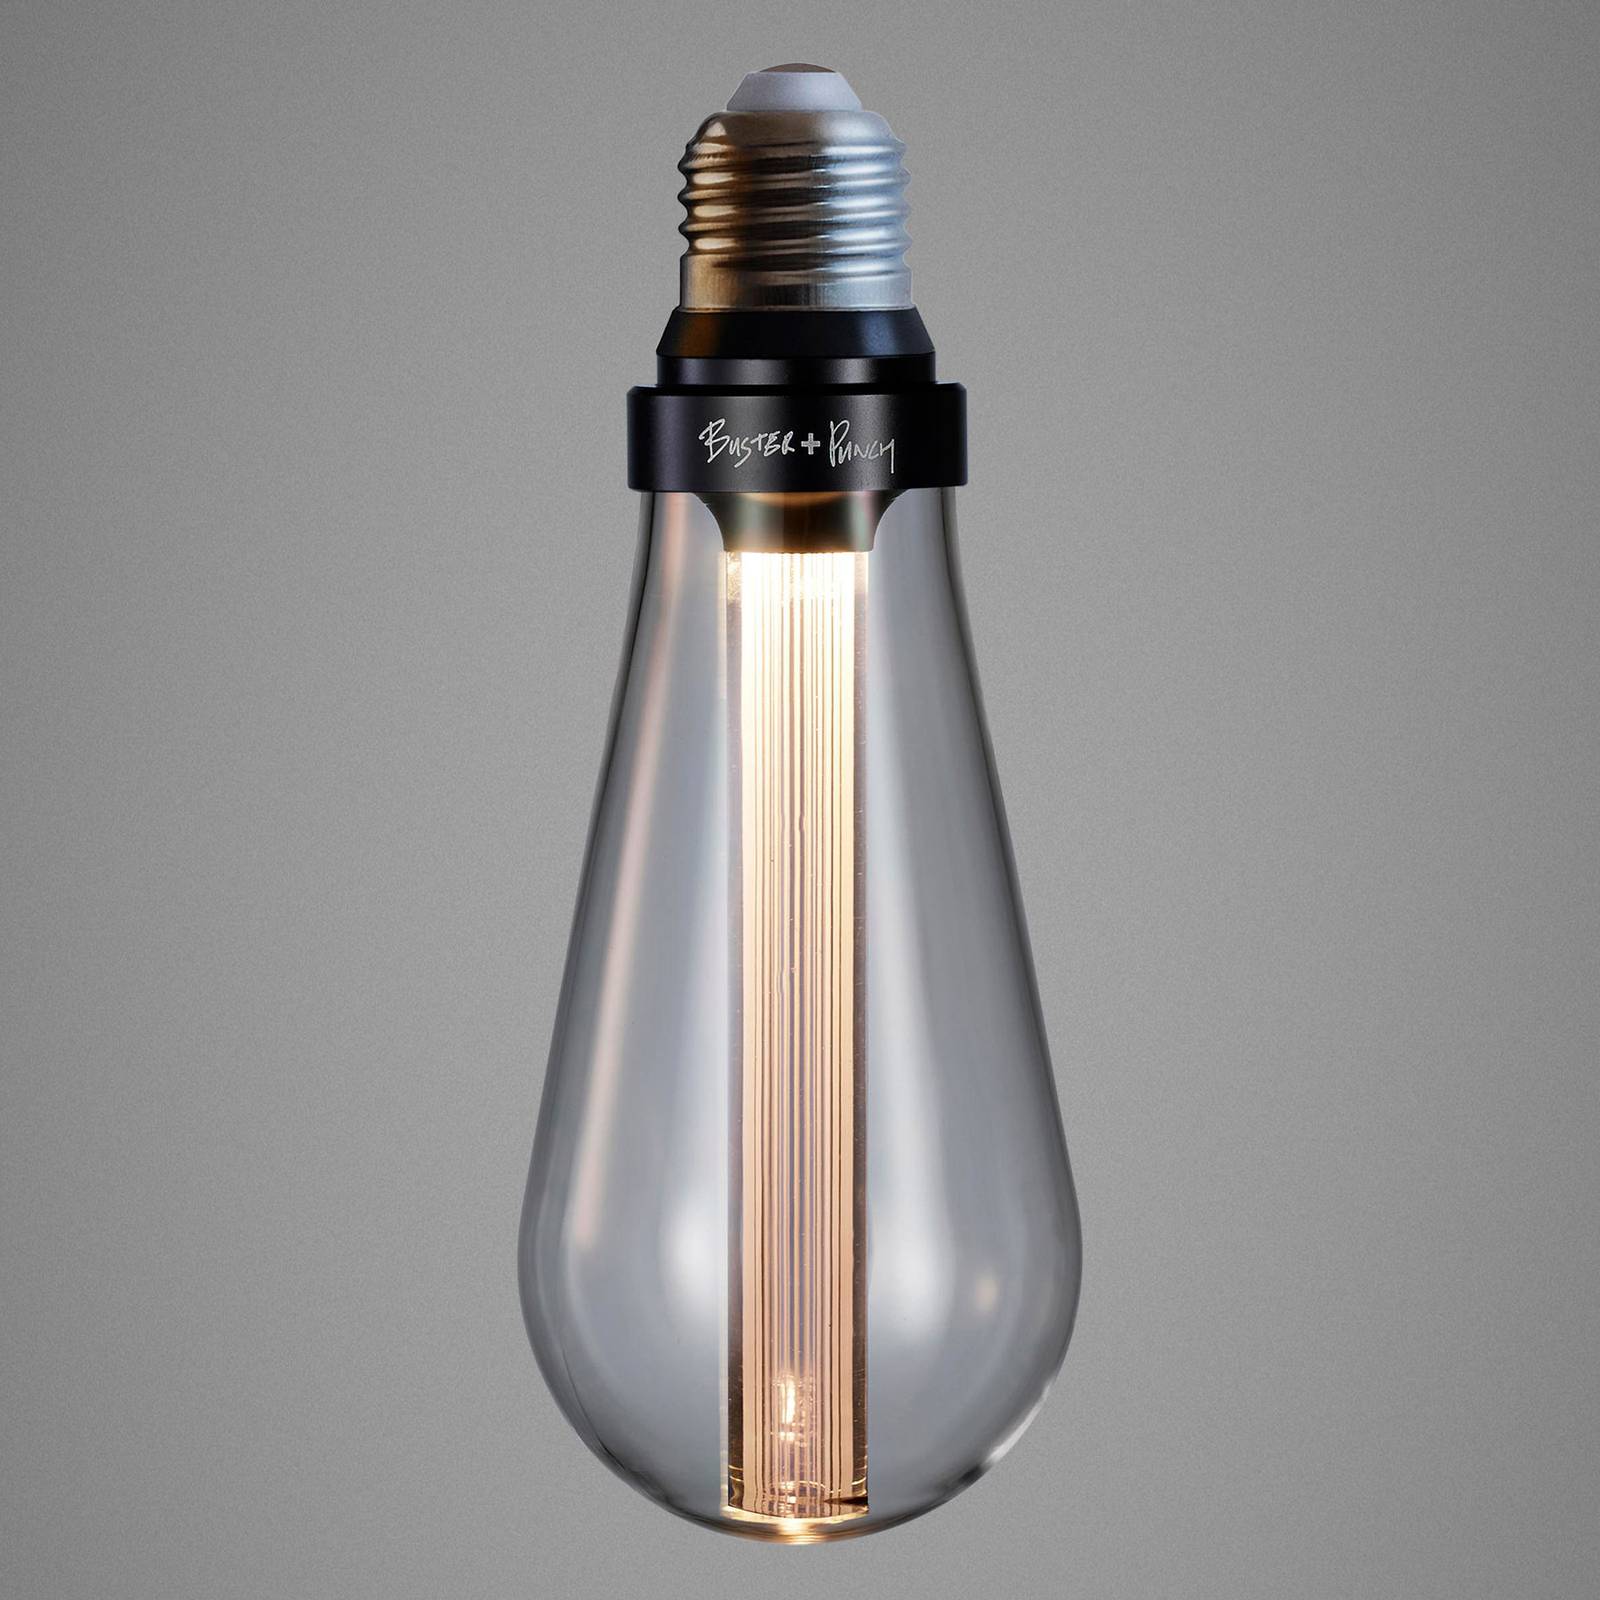 Buster + Punch LED-Lampe E27 2W dimmbar crystal von Buster + Punch